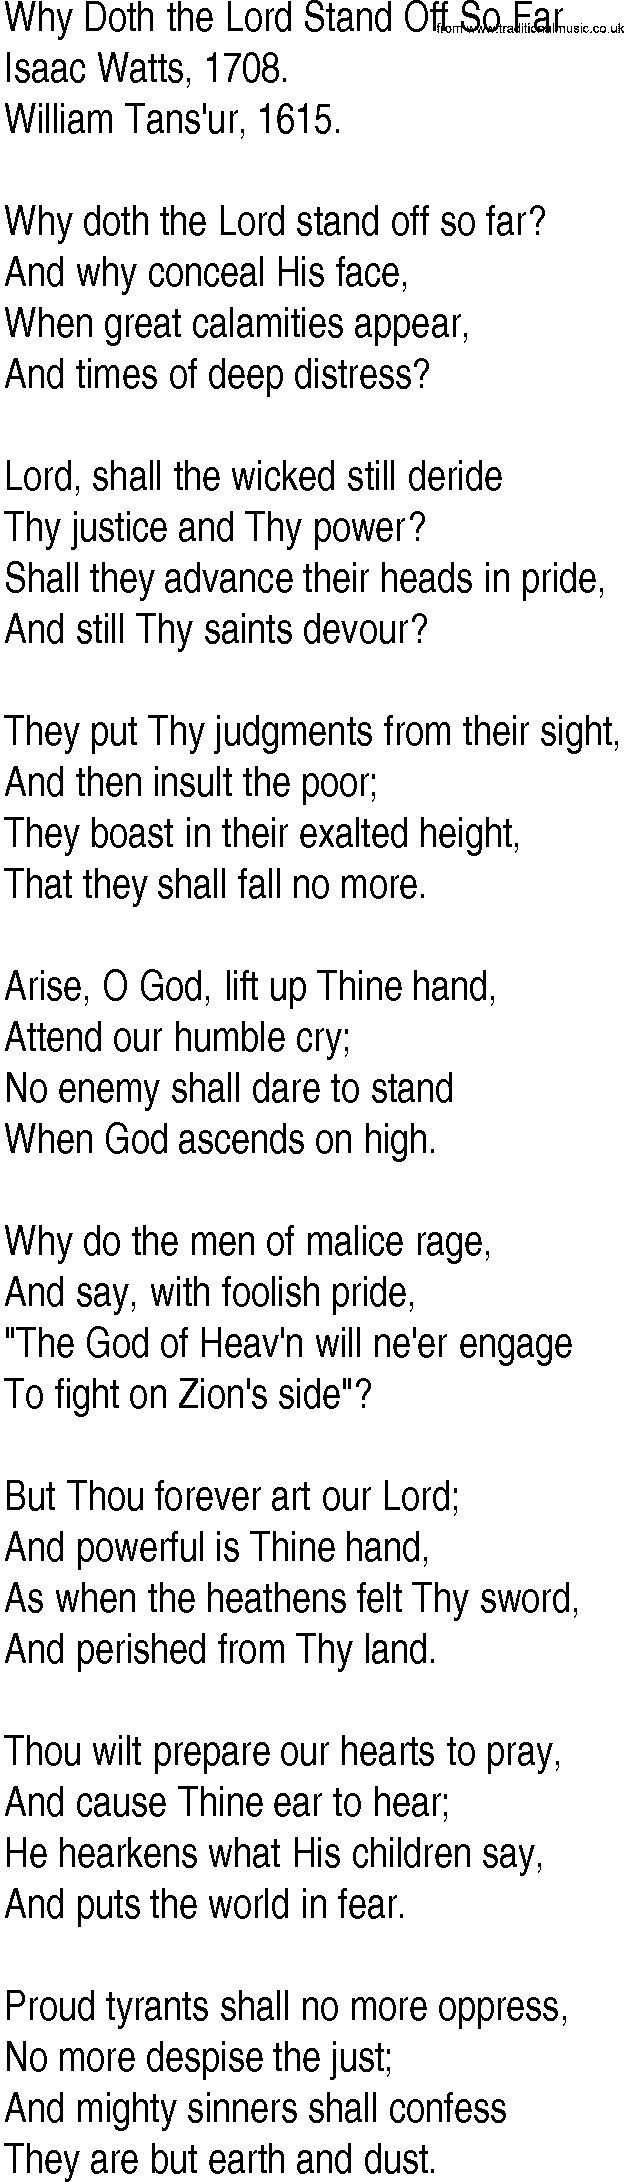 Hymn and Gospel Song: Why Doth the Lord Stand Off So Far by Isaac Watts lyrics